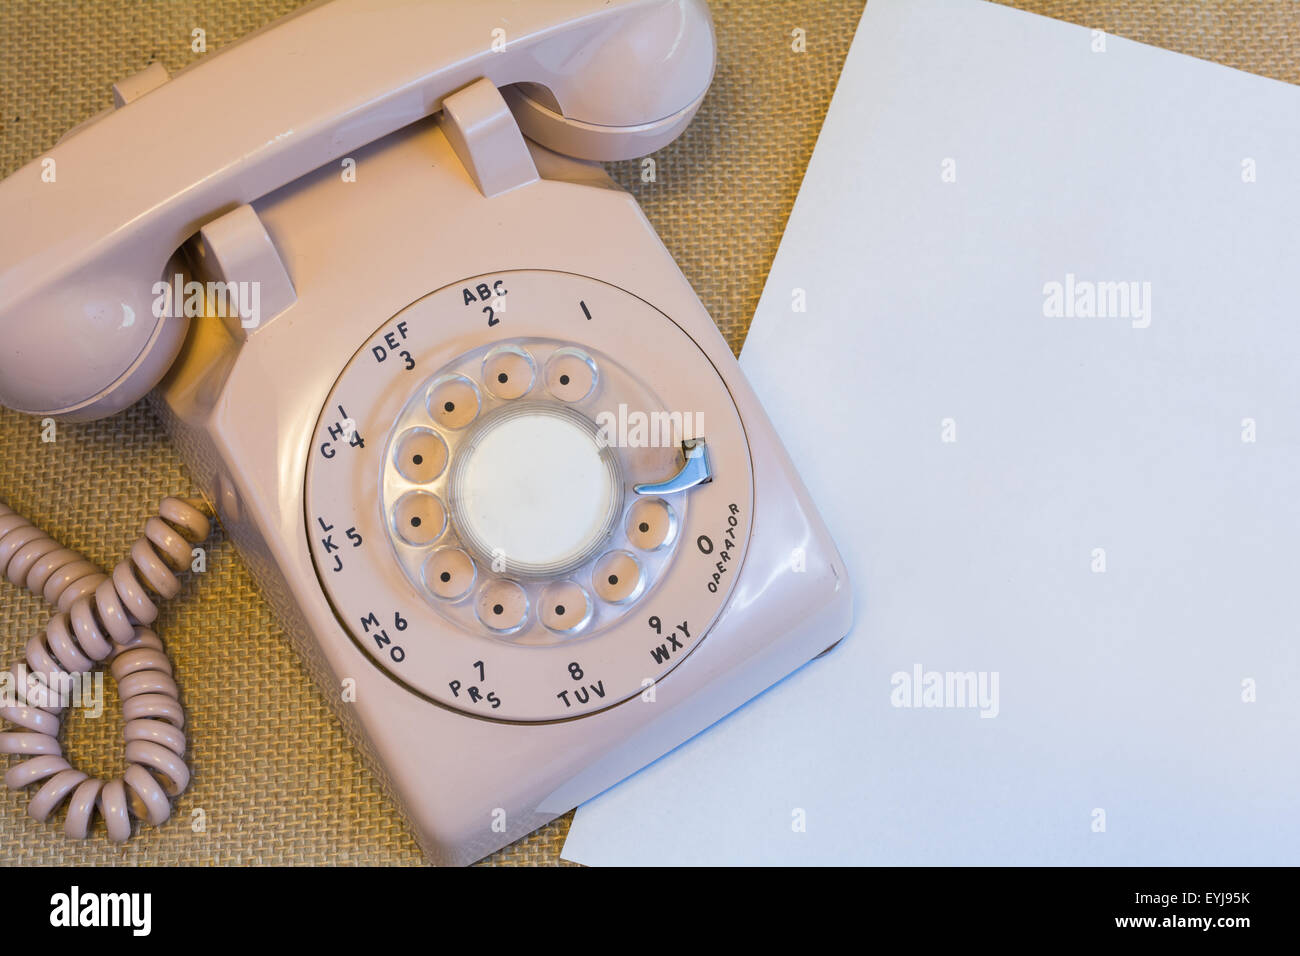 Rotary telephone with paper Stock Photo